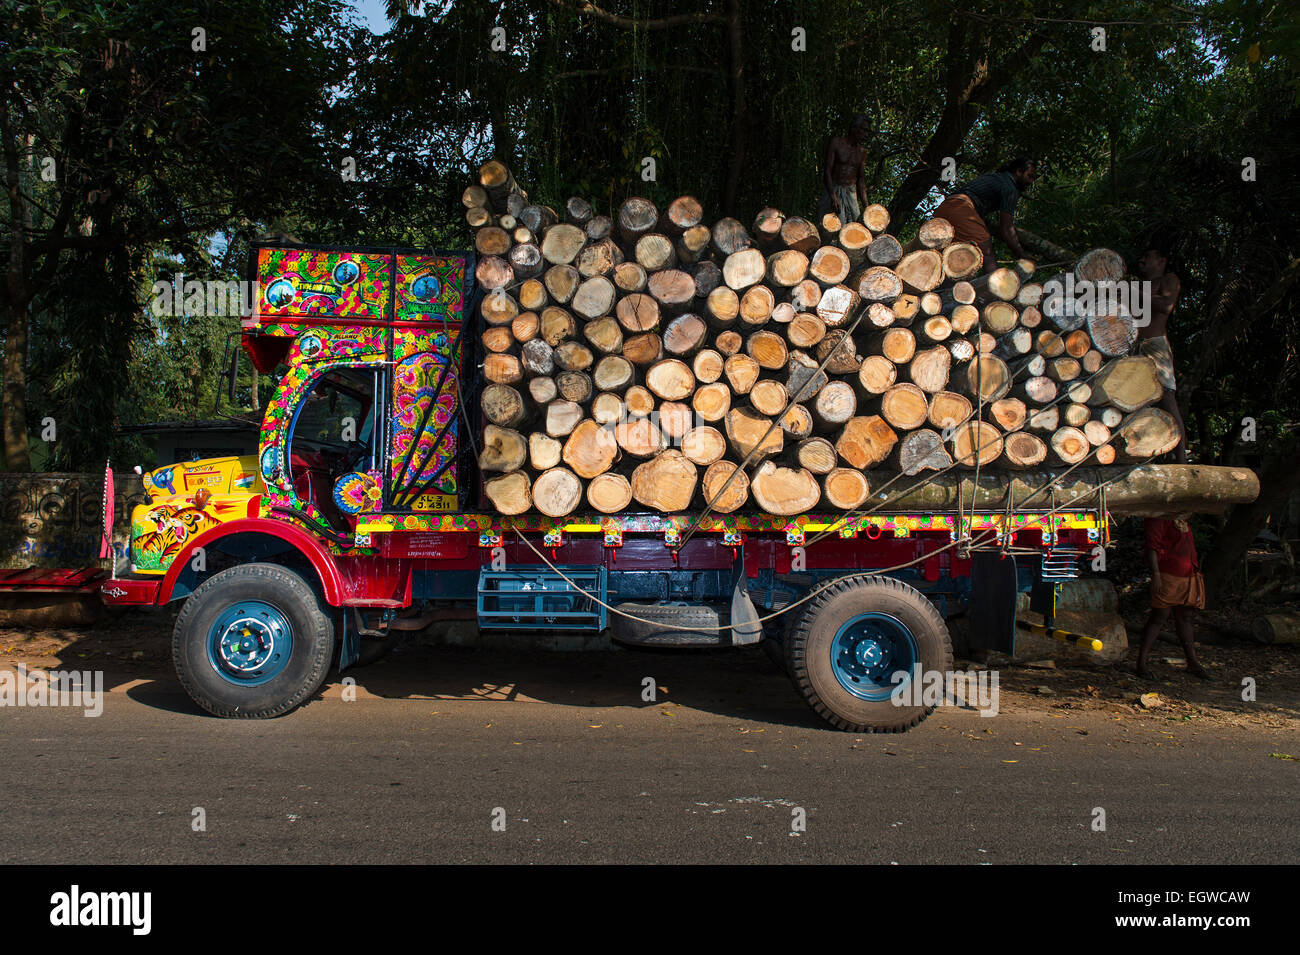 Brightly painted truck loaded with logs, near Alleppy, Kerala, India Stock Photo